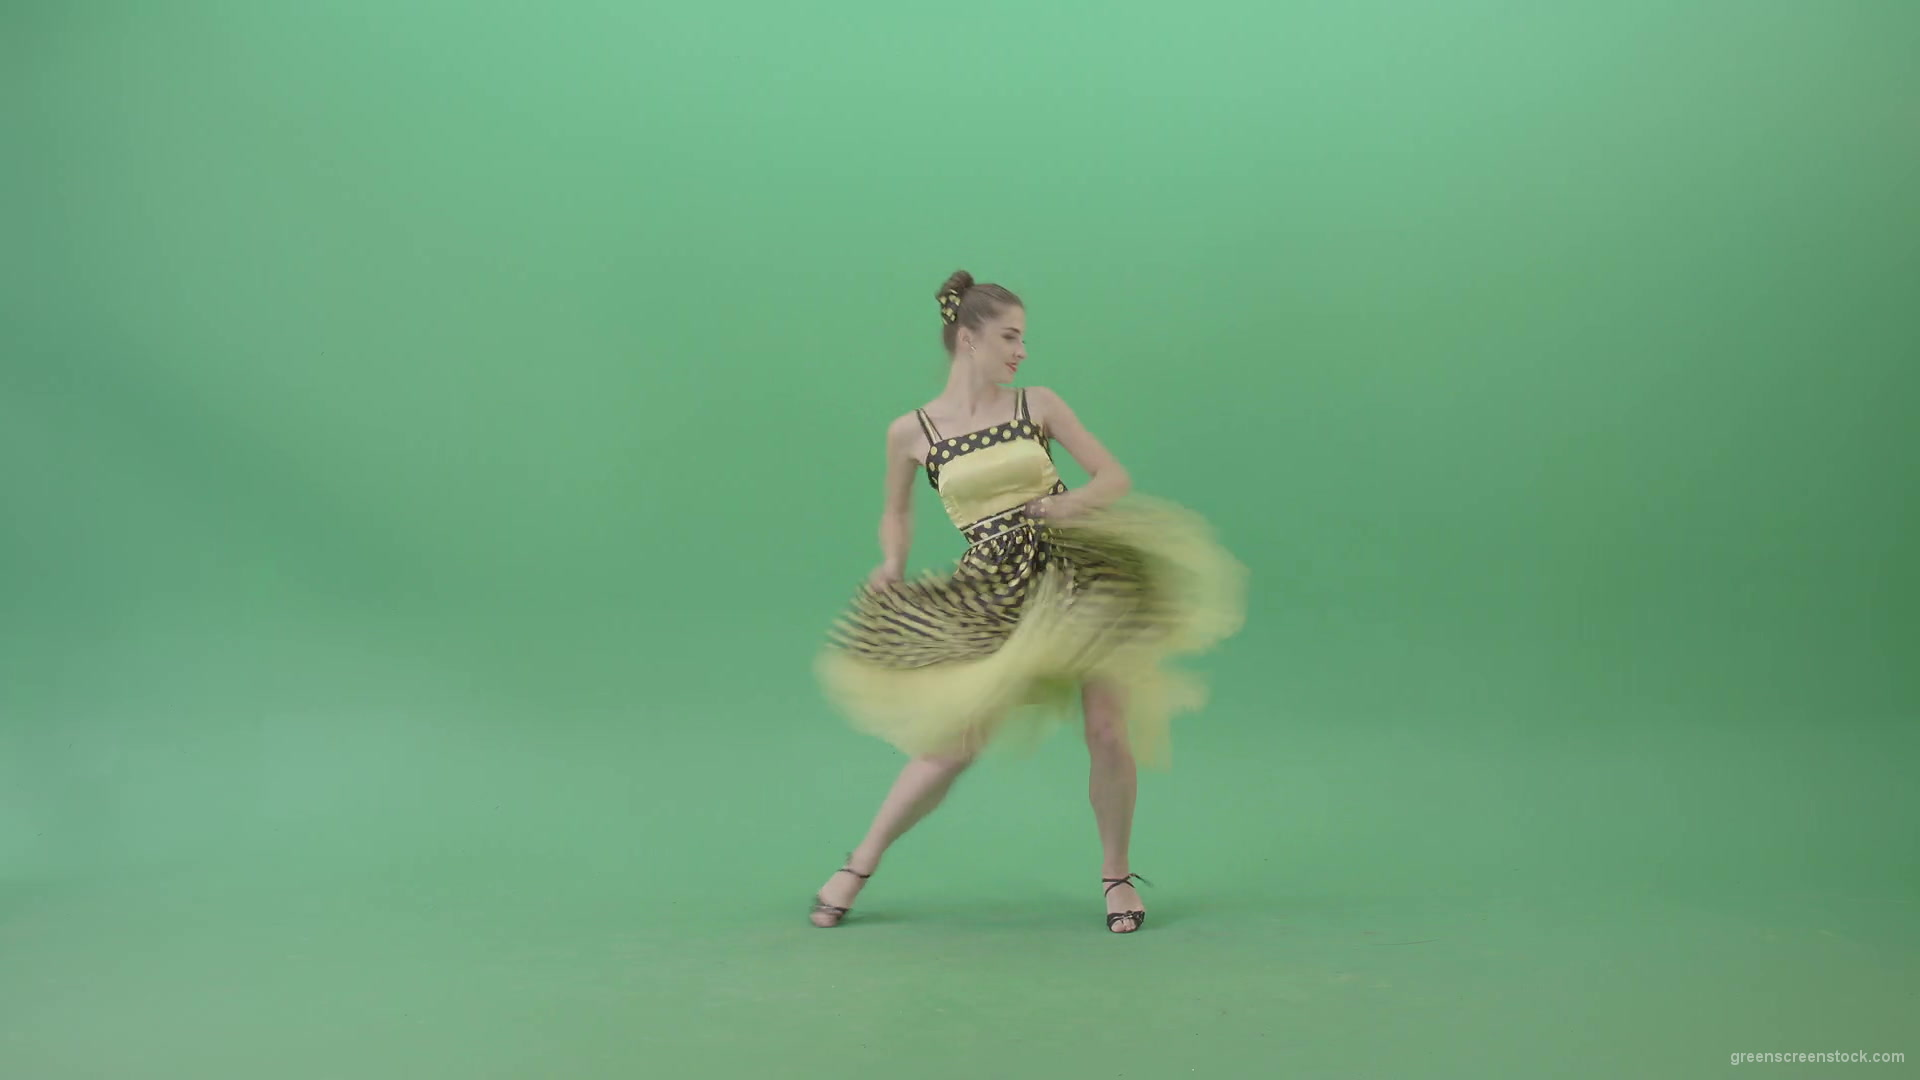 Happy-Woman-dancing-Rock-and-Roll-Jazz-Swing-Boogie-woogie-isolated-on-Green-Screen-4K-Video-Footage-1920_004 Green Screen Stock